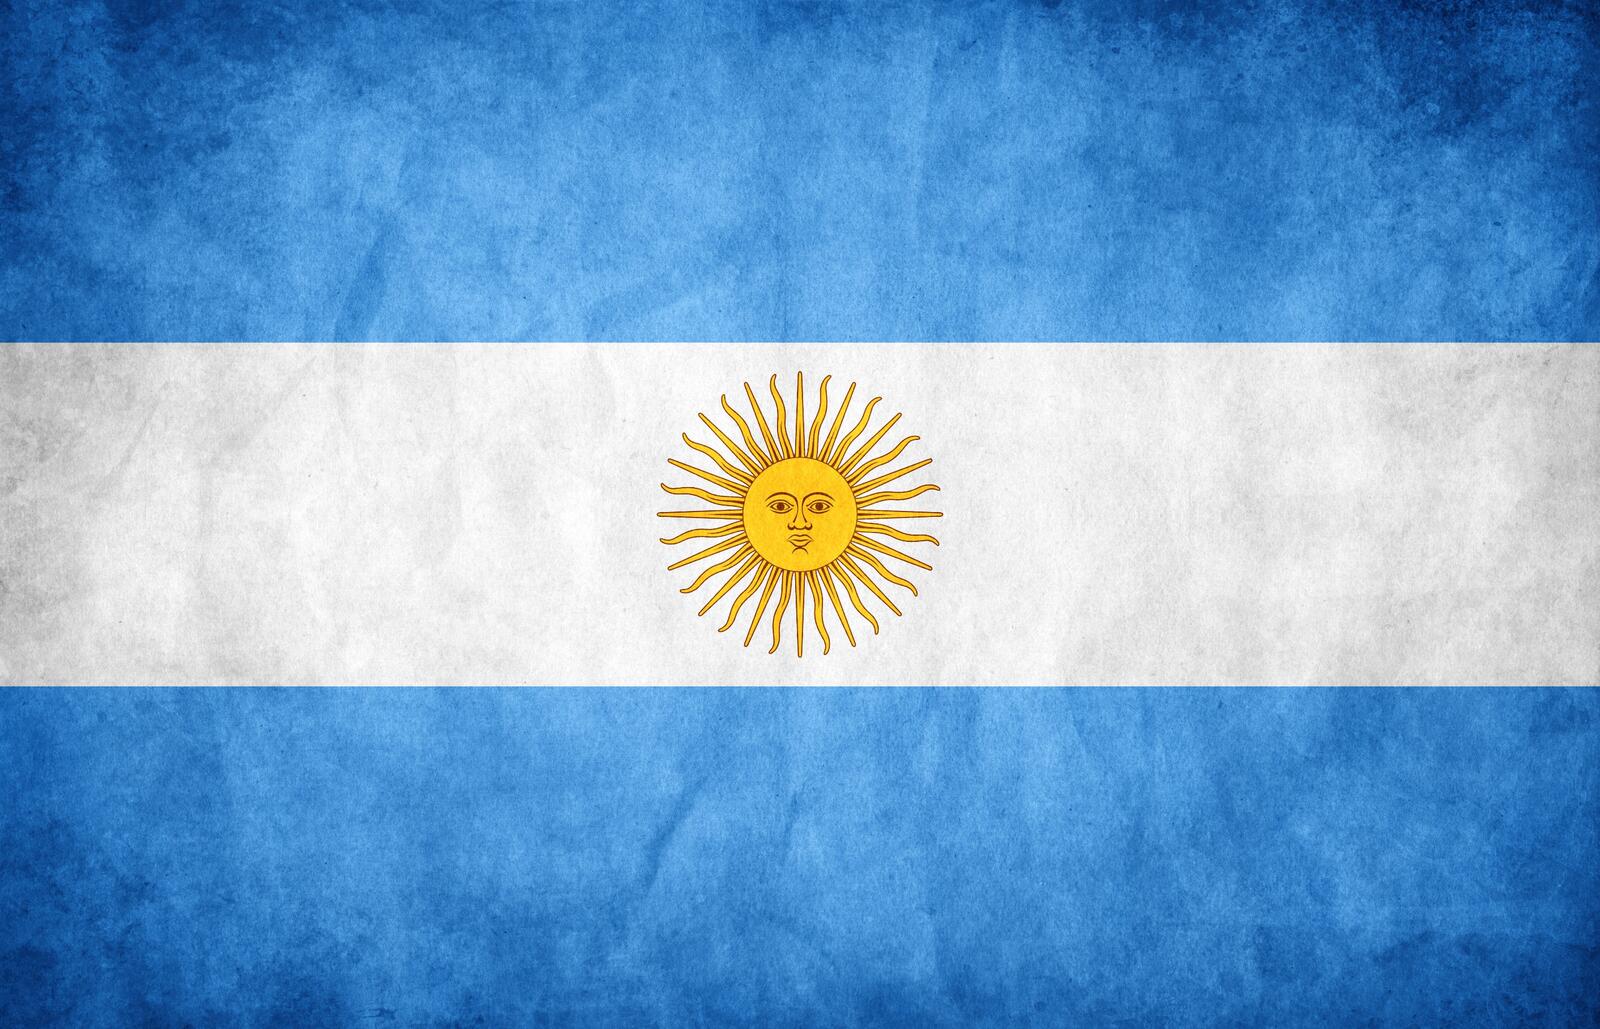 Wallpapers flag textures argentina on the desktop